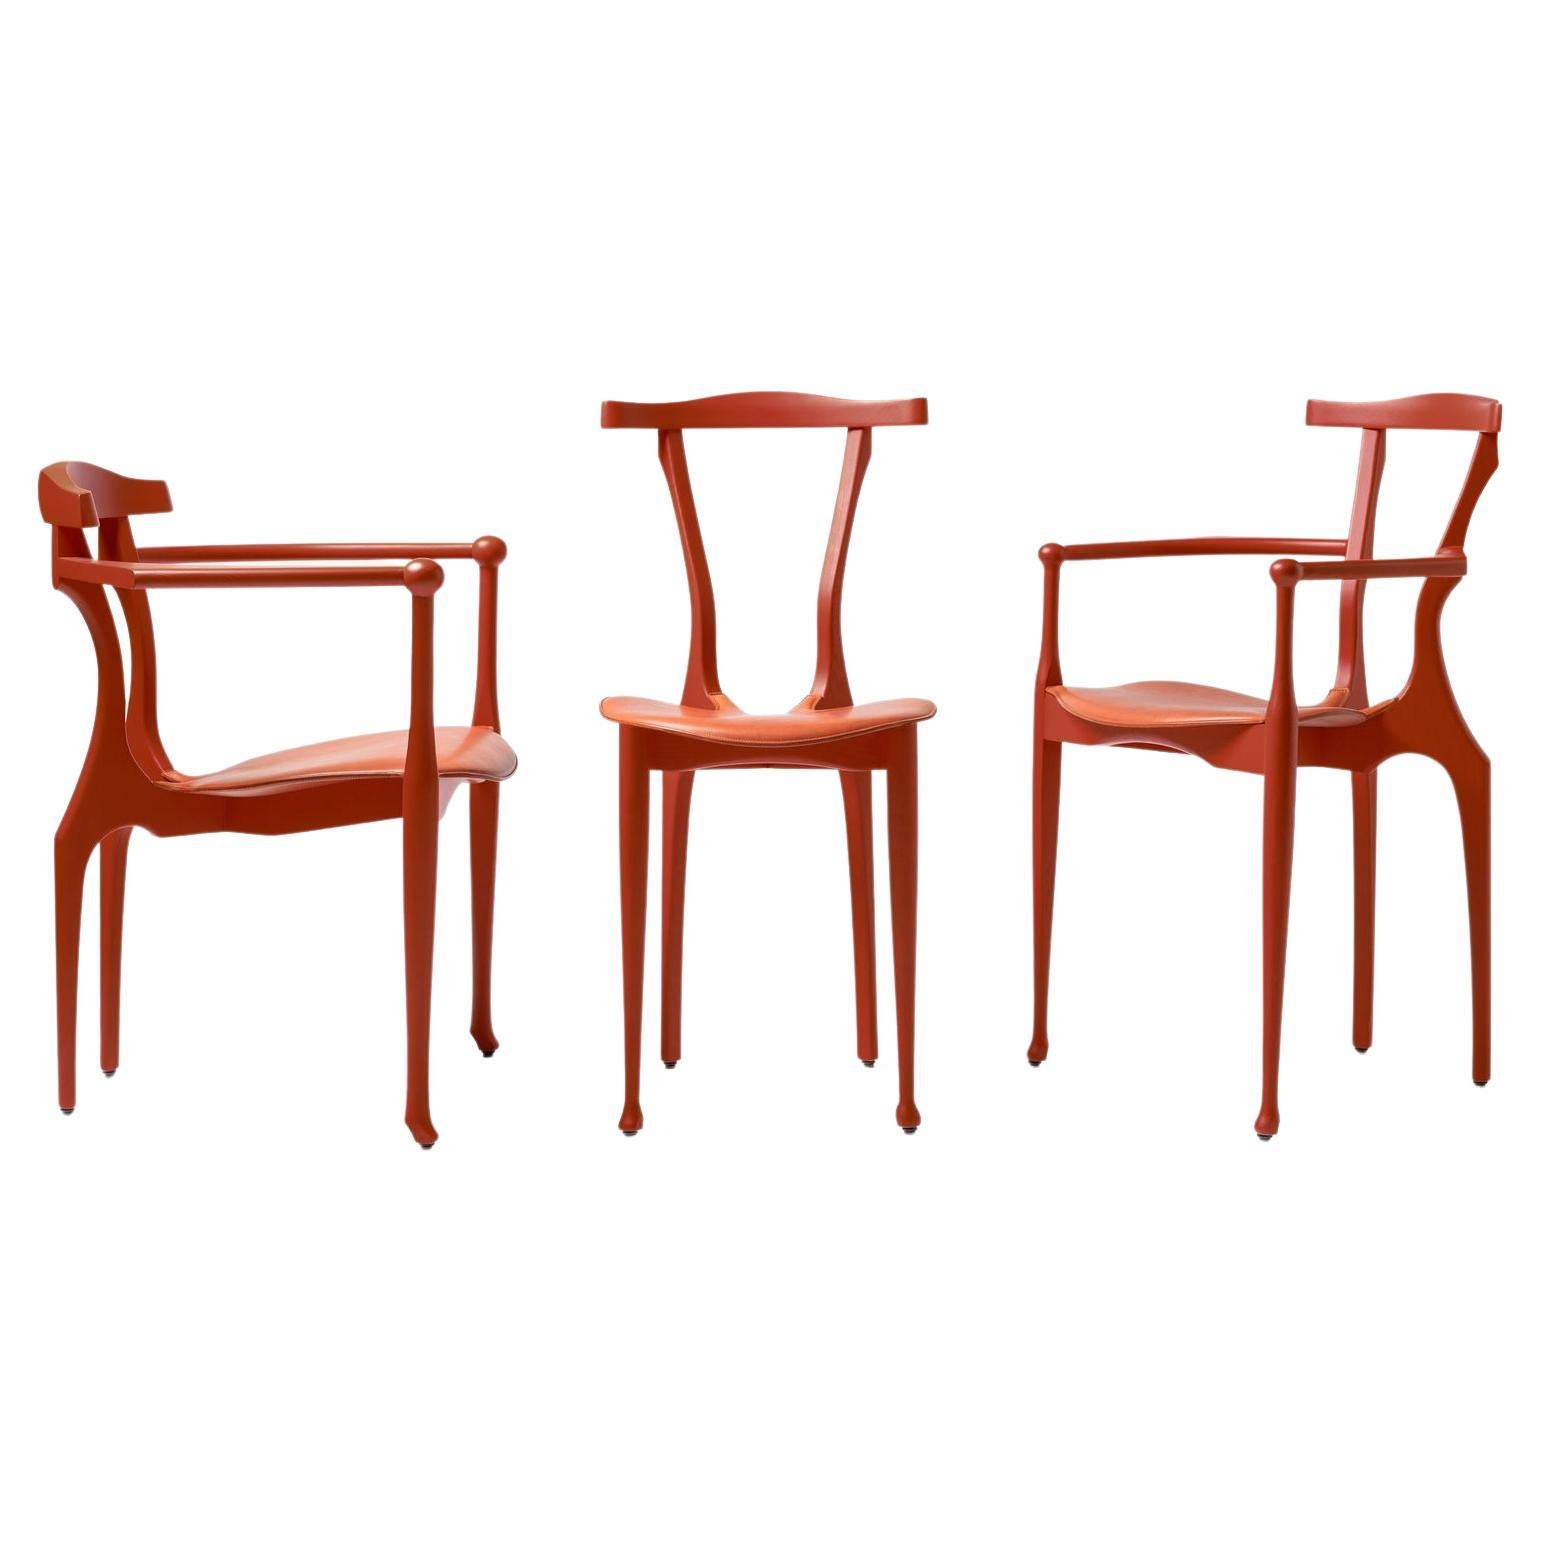 Set of 3 Gaulinetta Chairs by Oscar Tusquets For Sale